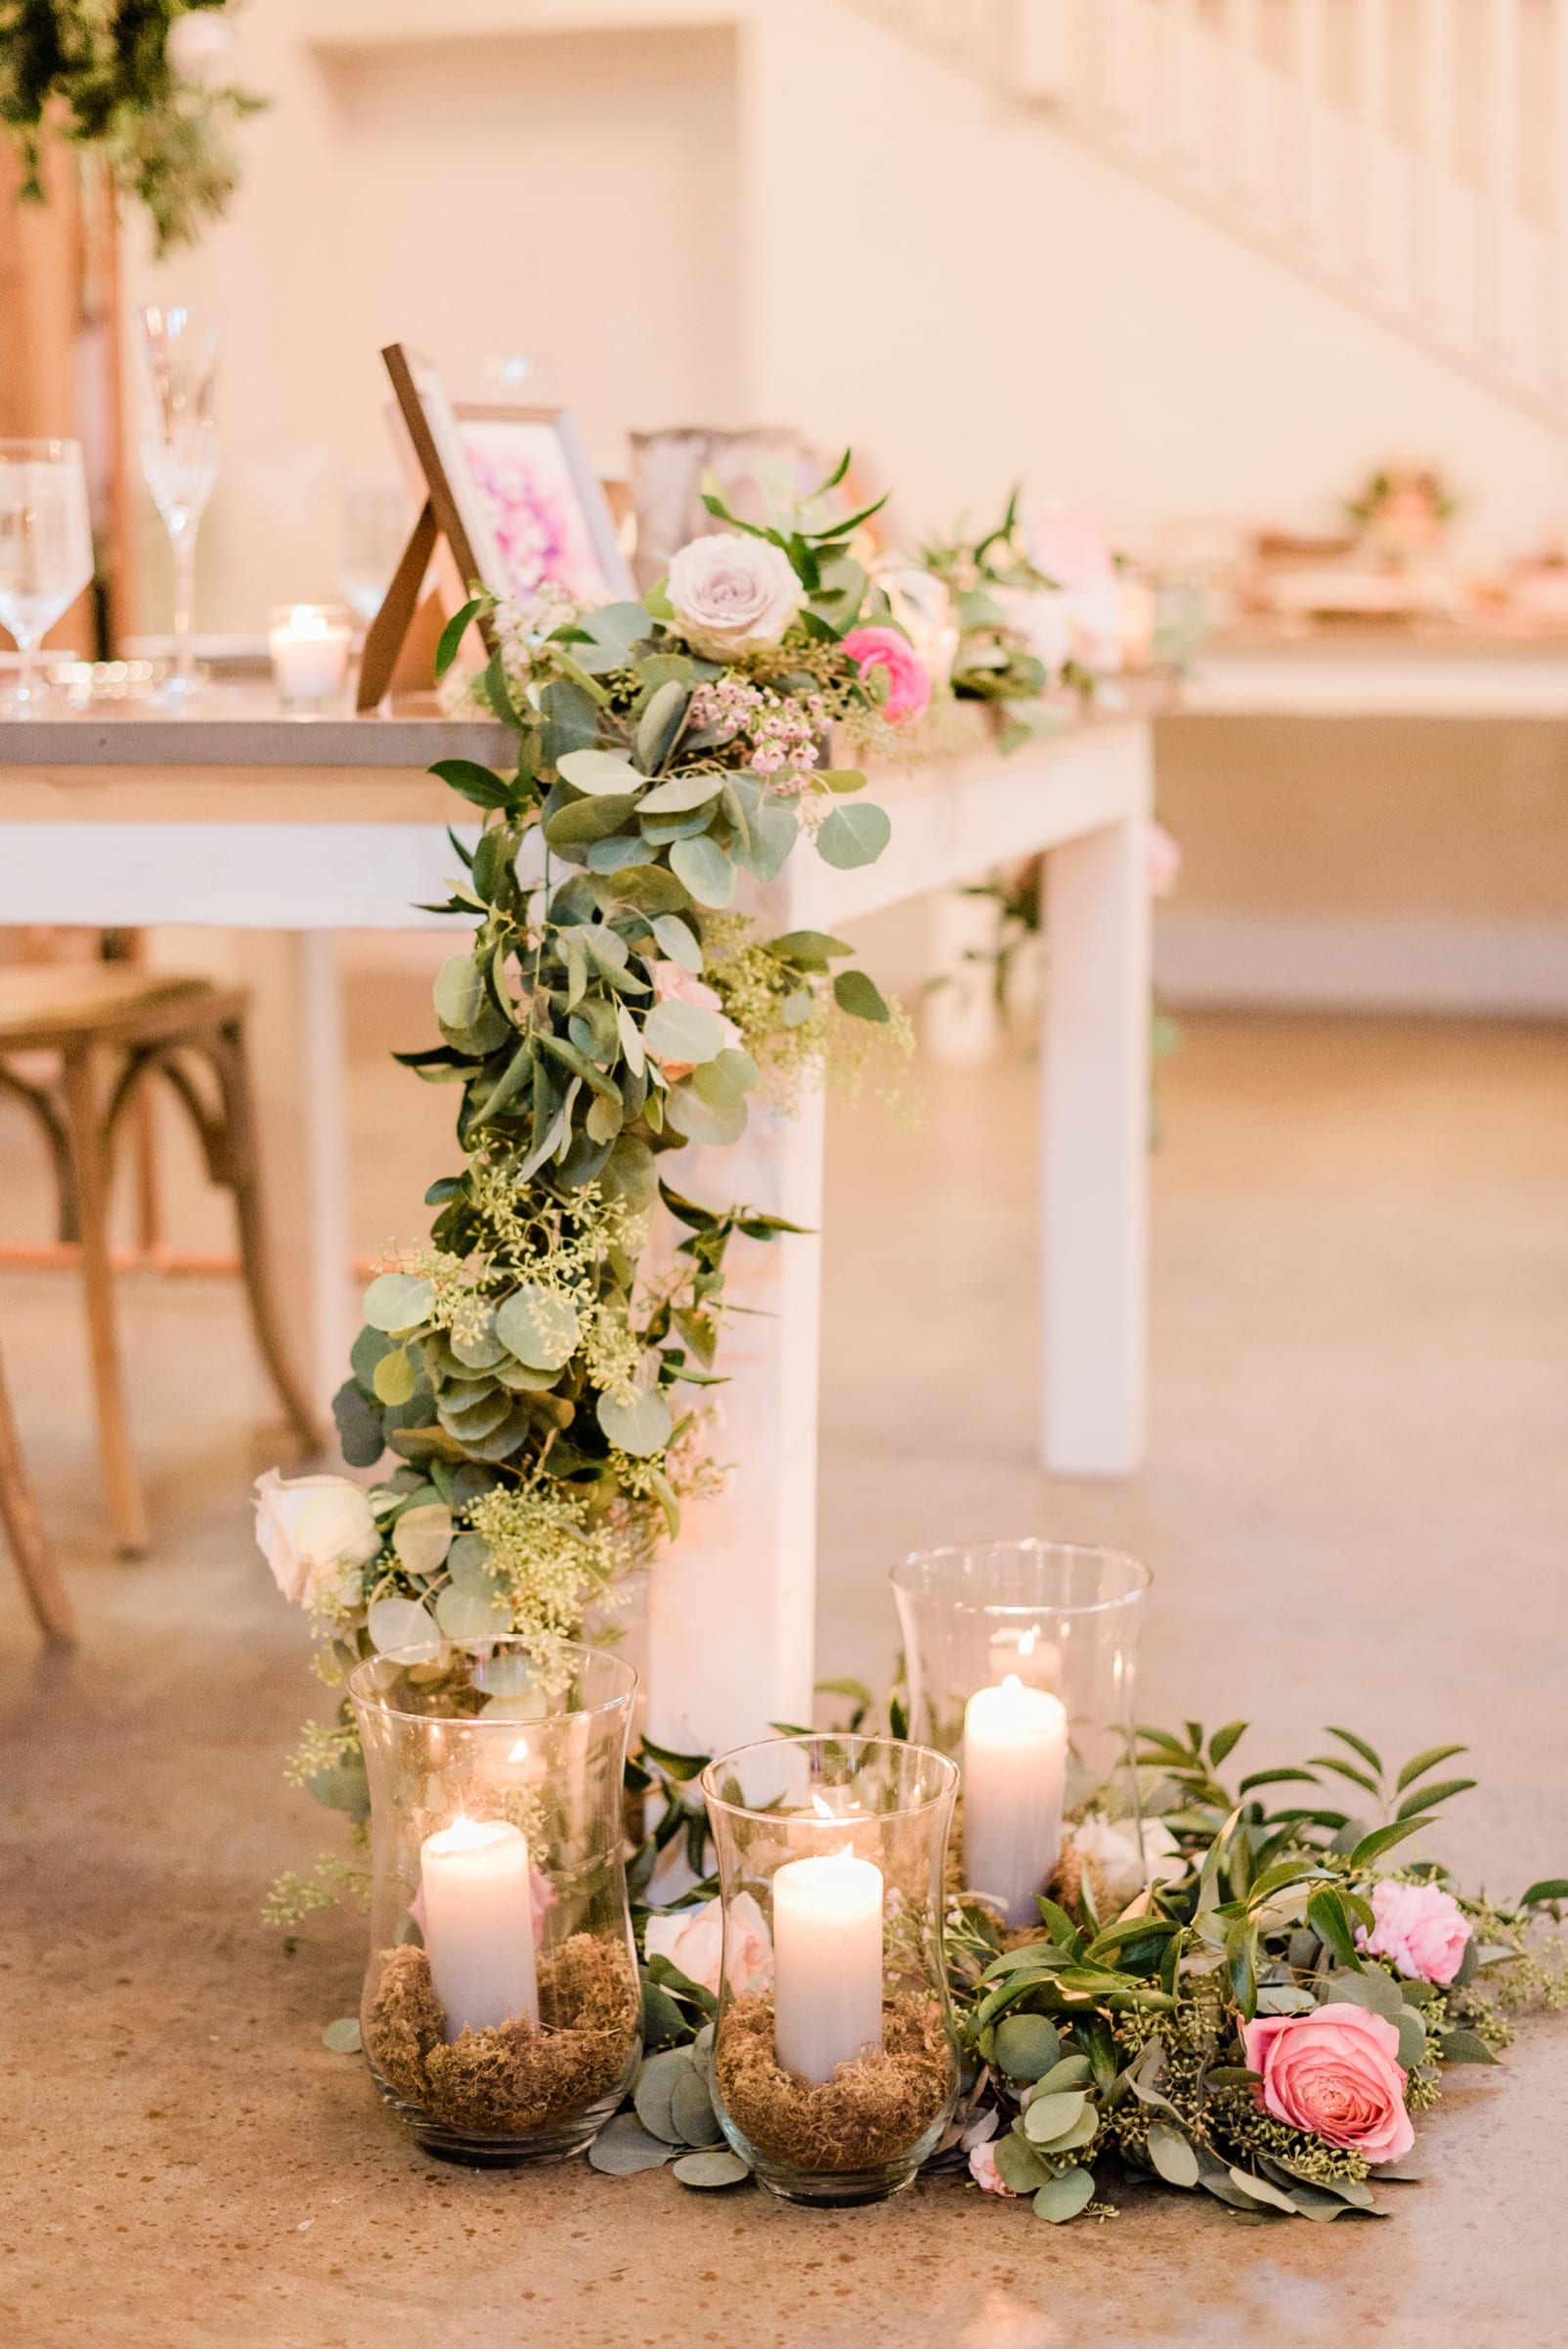 Barn of Chapel Hill greenery cascading from the sweetheart table down to the floor woven between candles photo